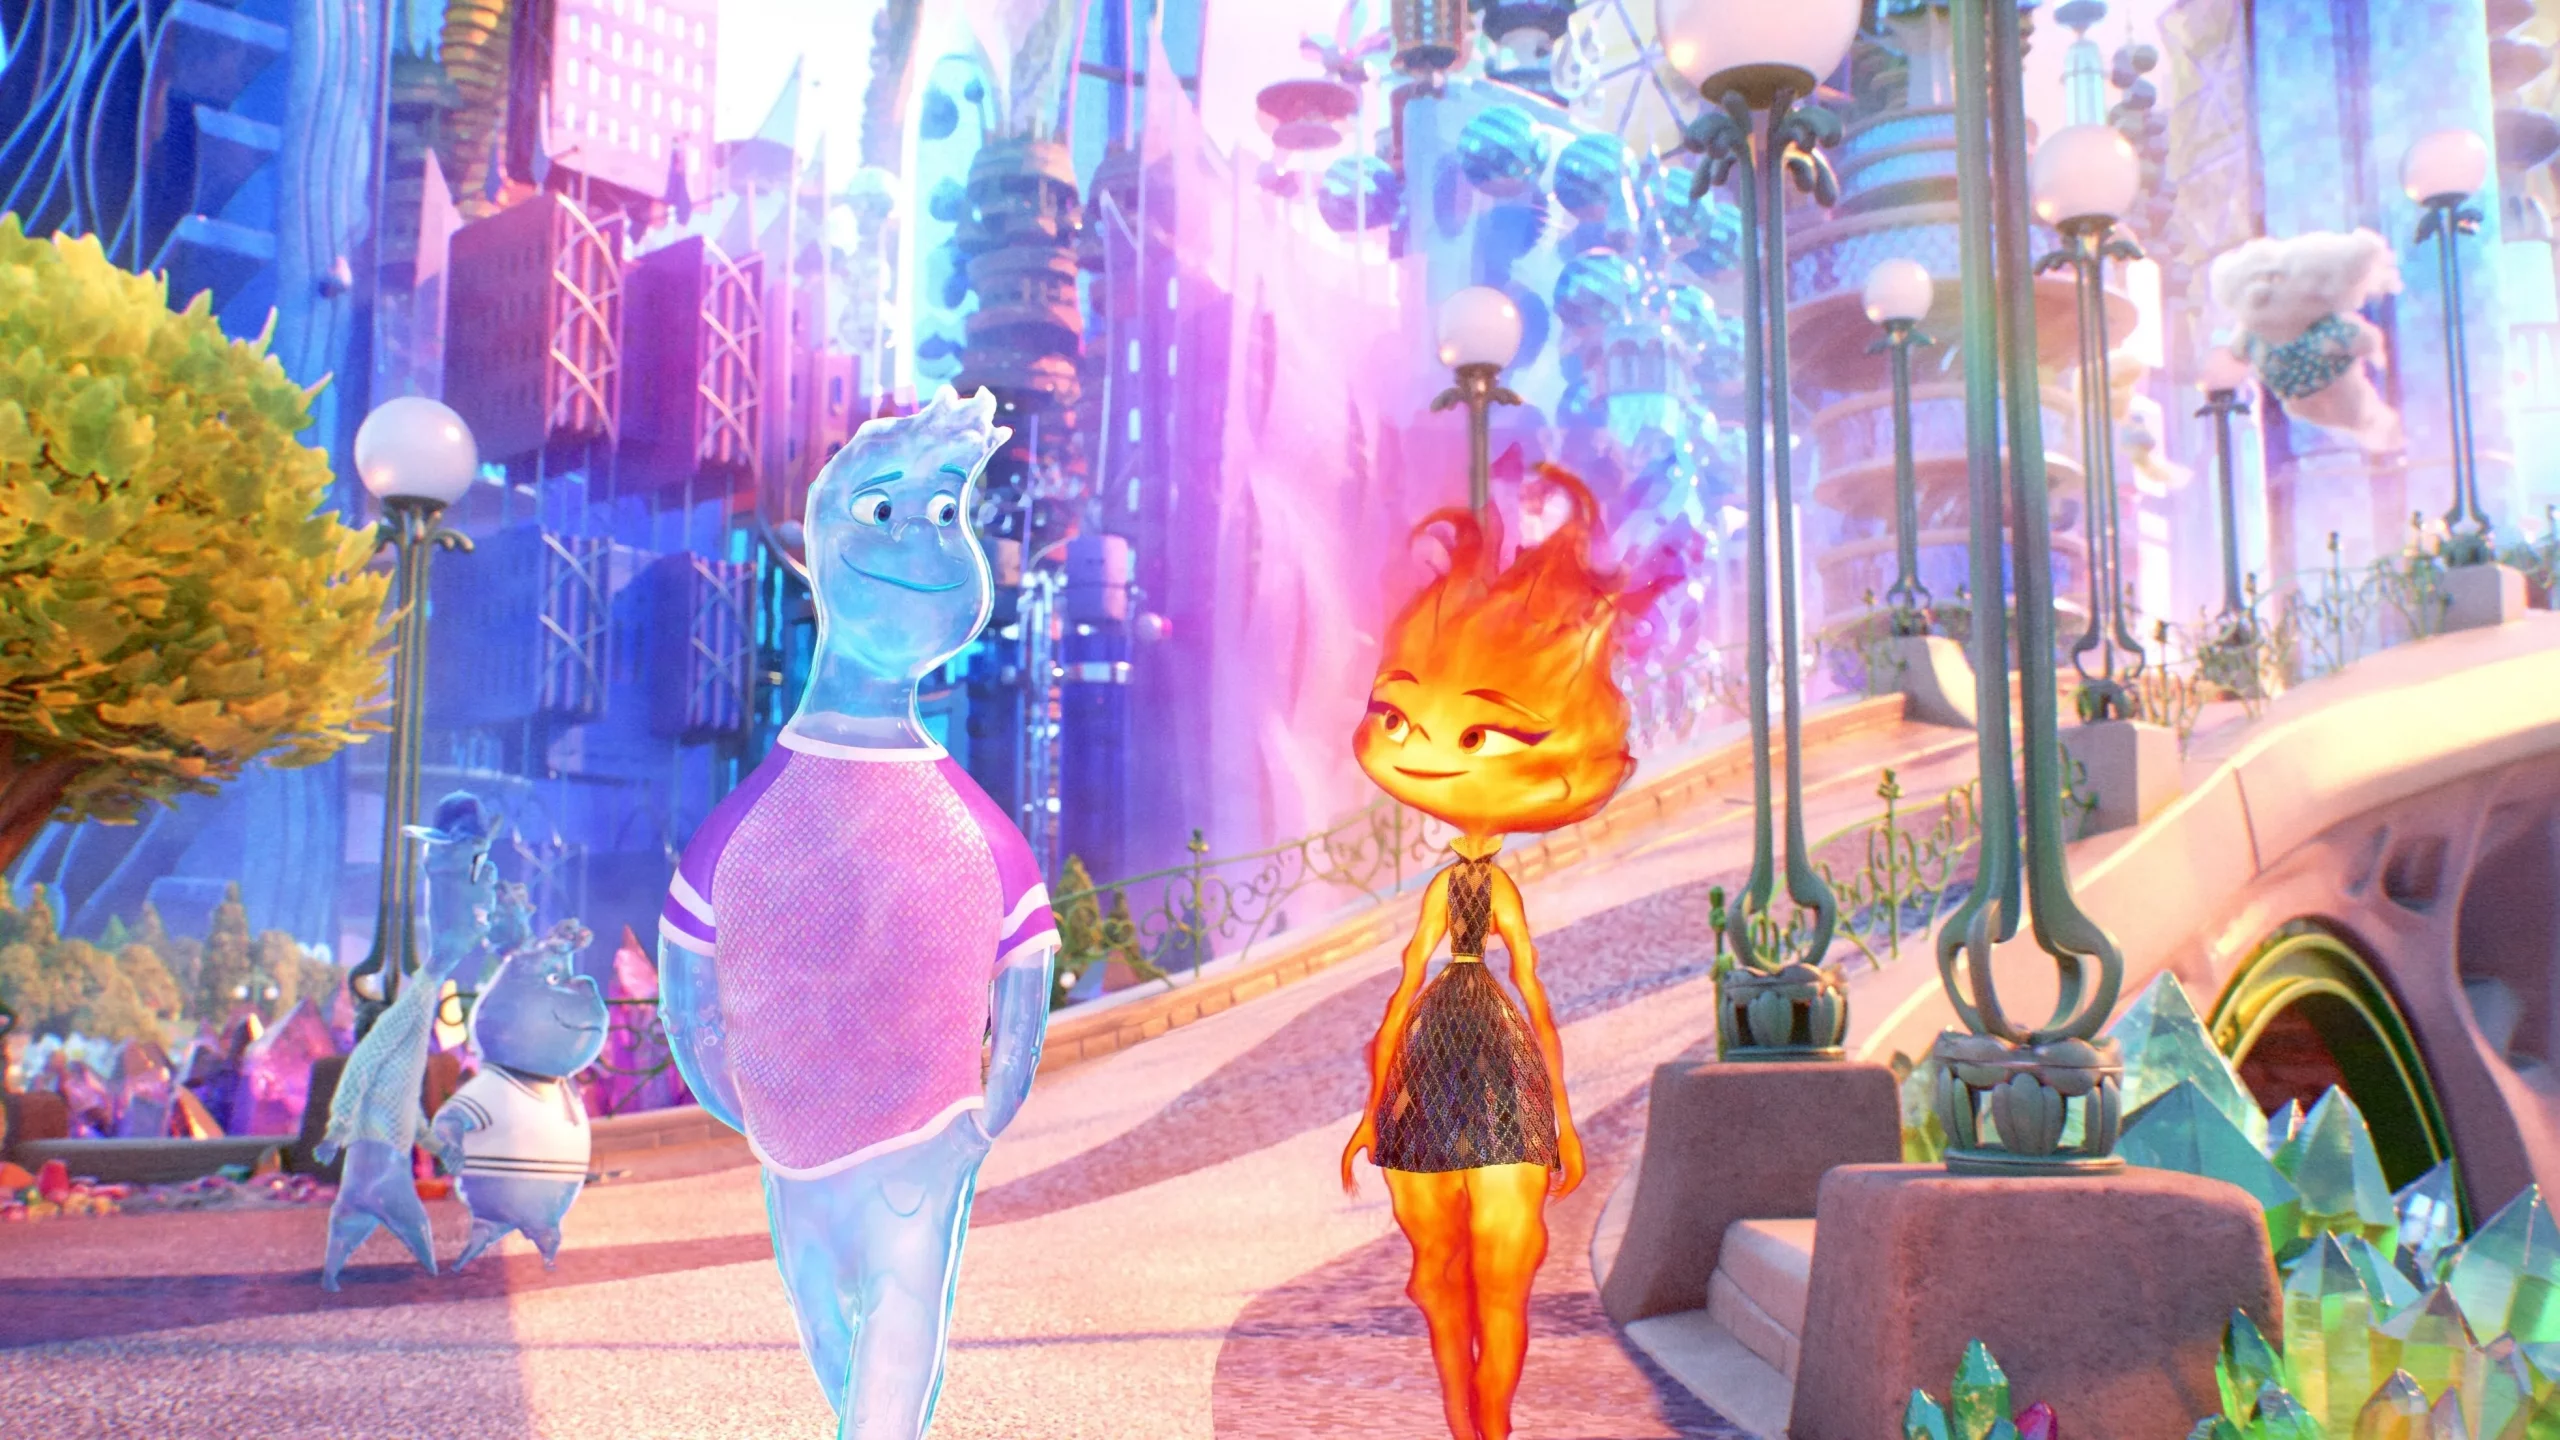 In a fantastical animated world, a fire person and a water person walk side by side, looking coyly at each other.